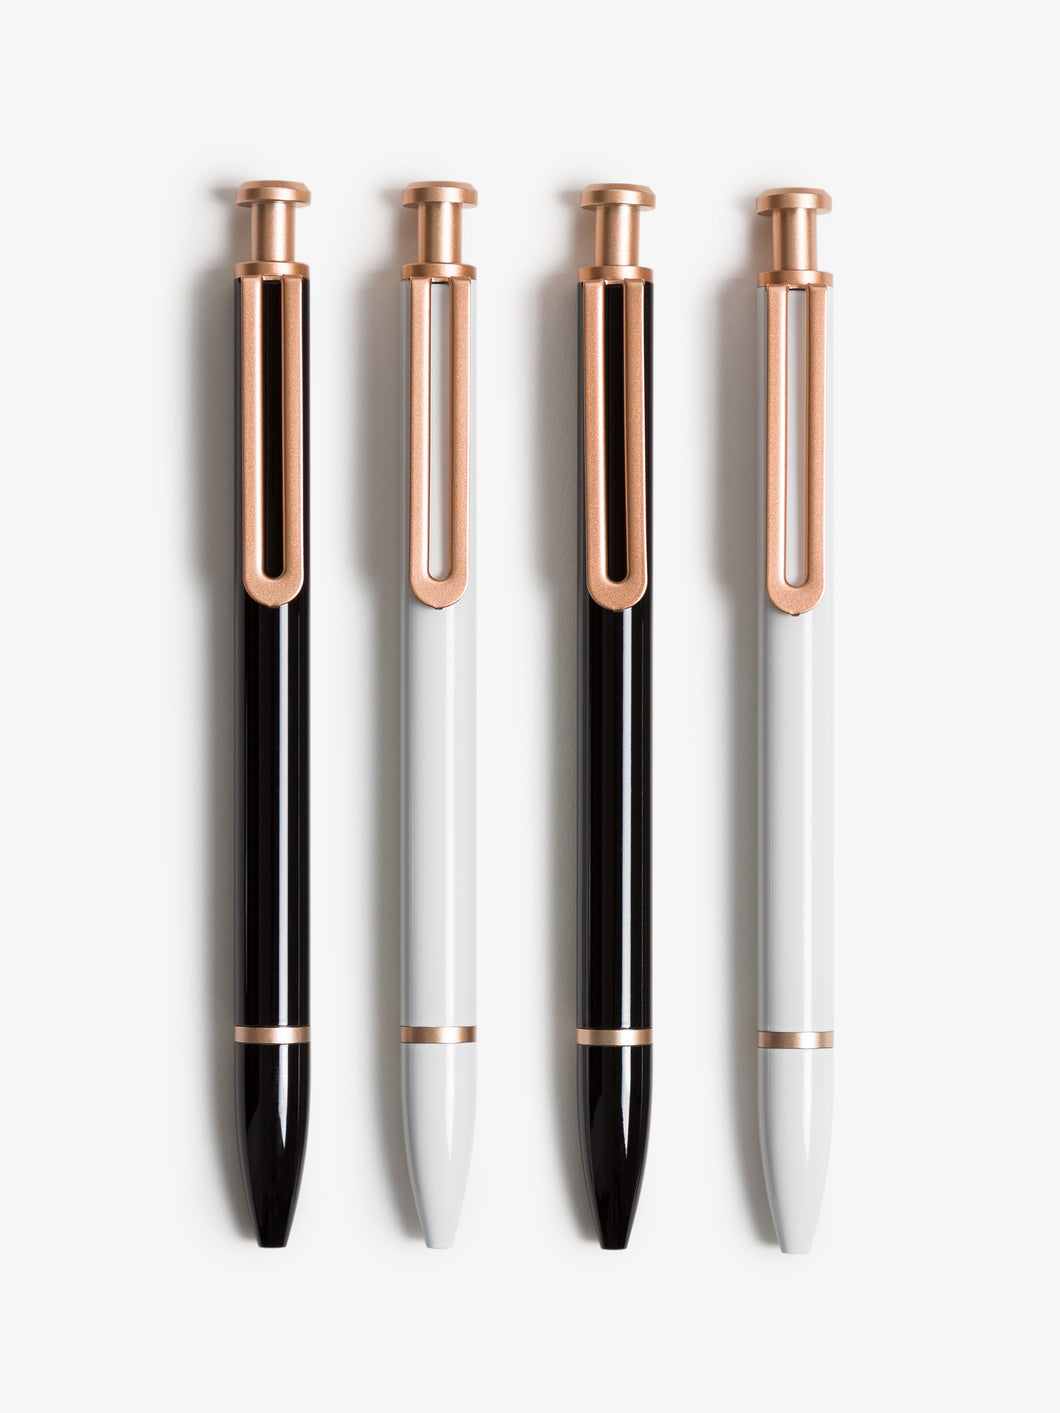 Monterey Ballpoint Pens - White & Black with Rose Gold Accents, Set of 4